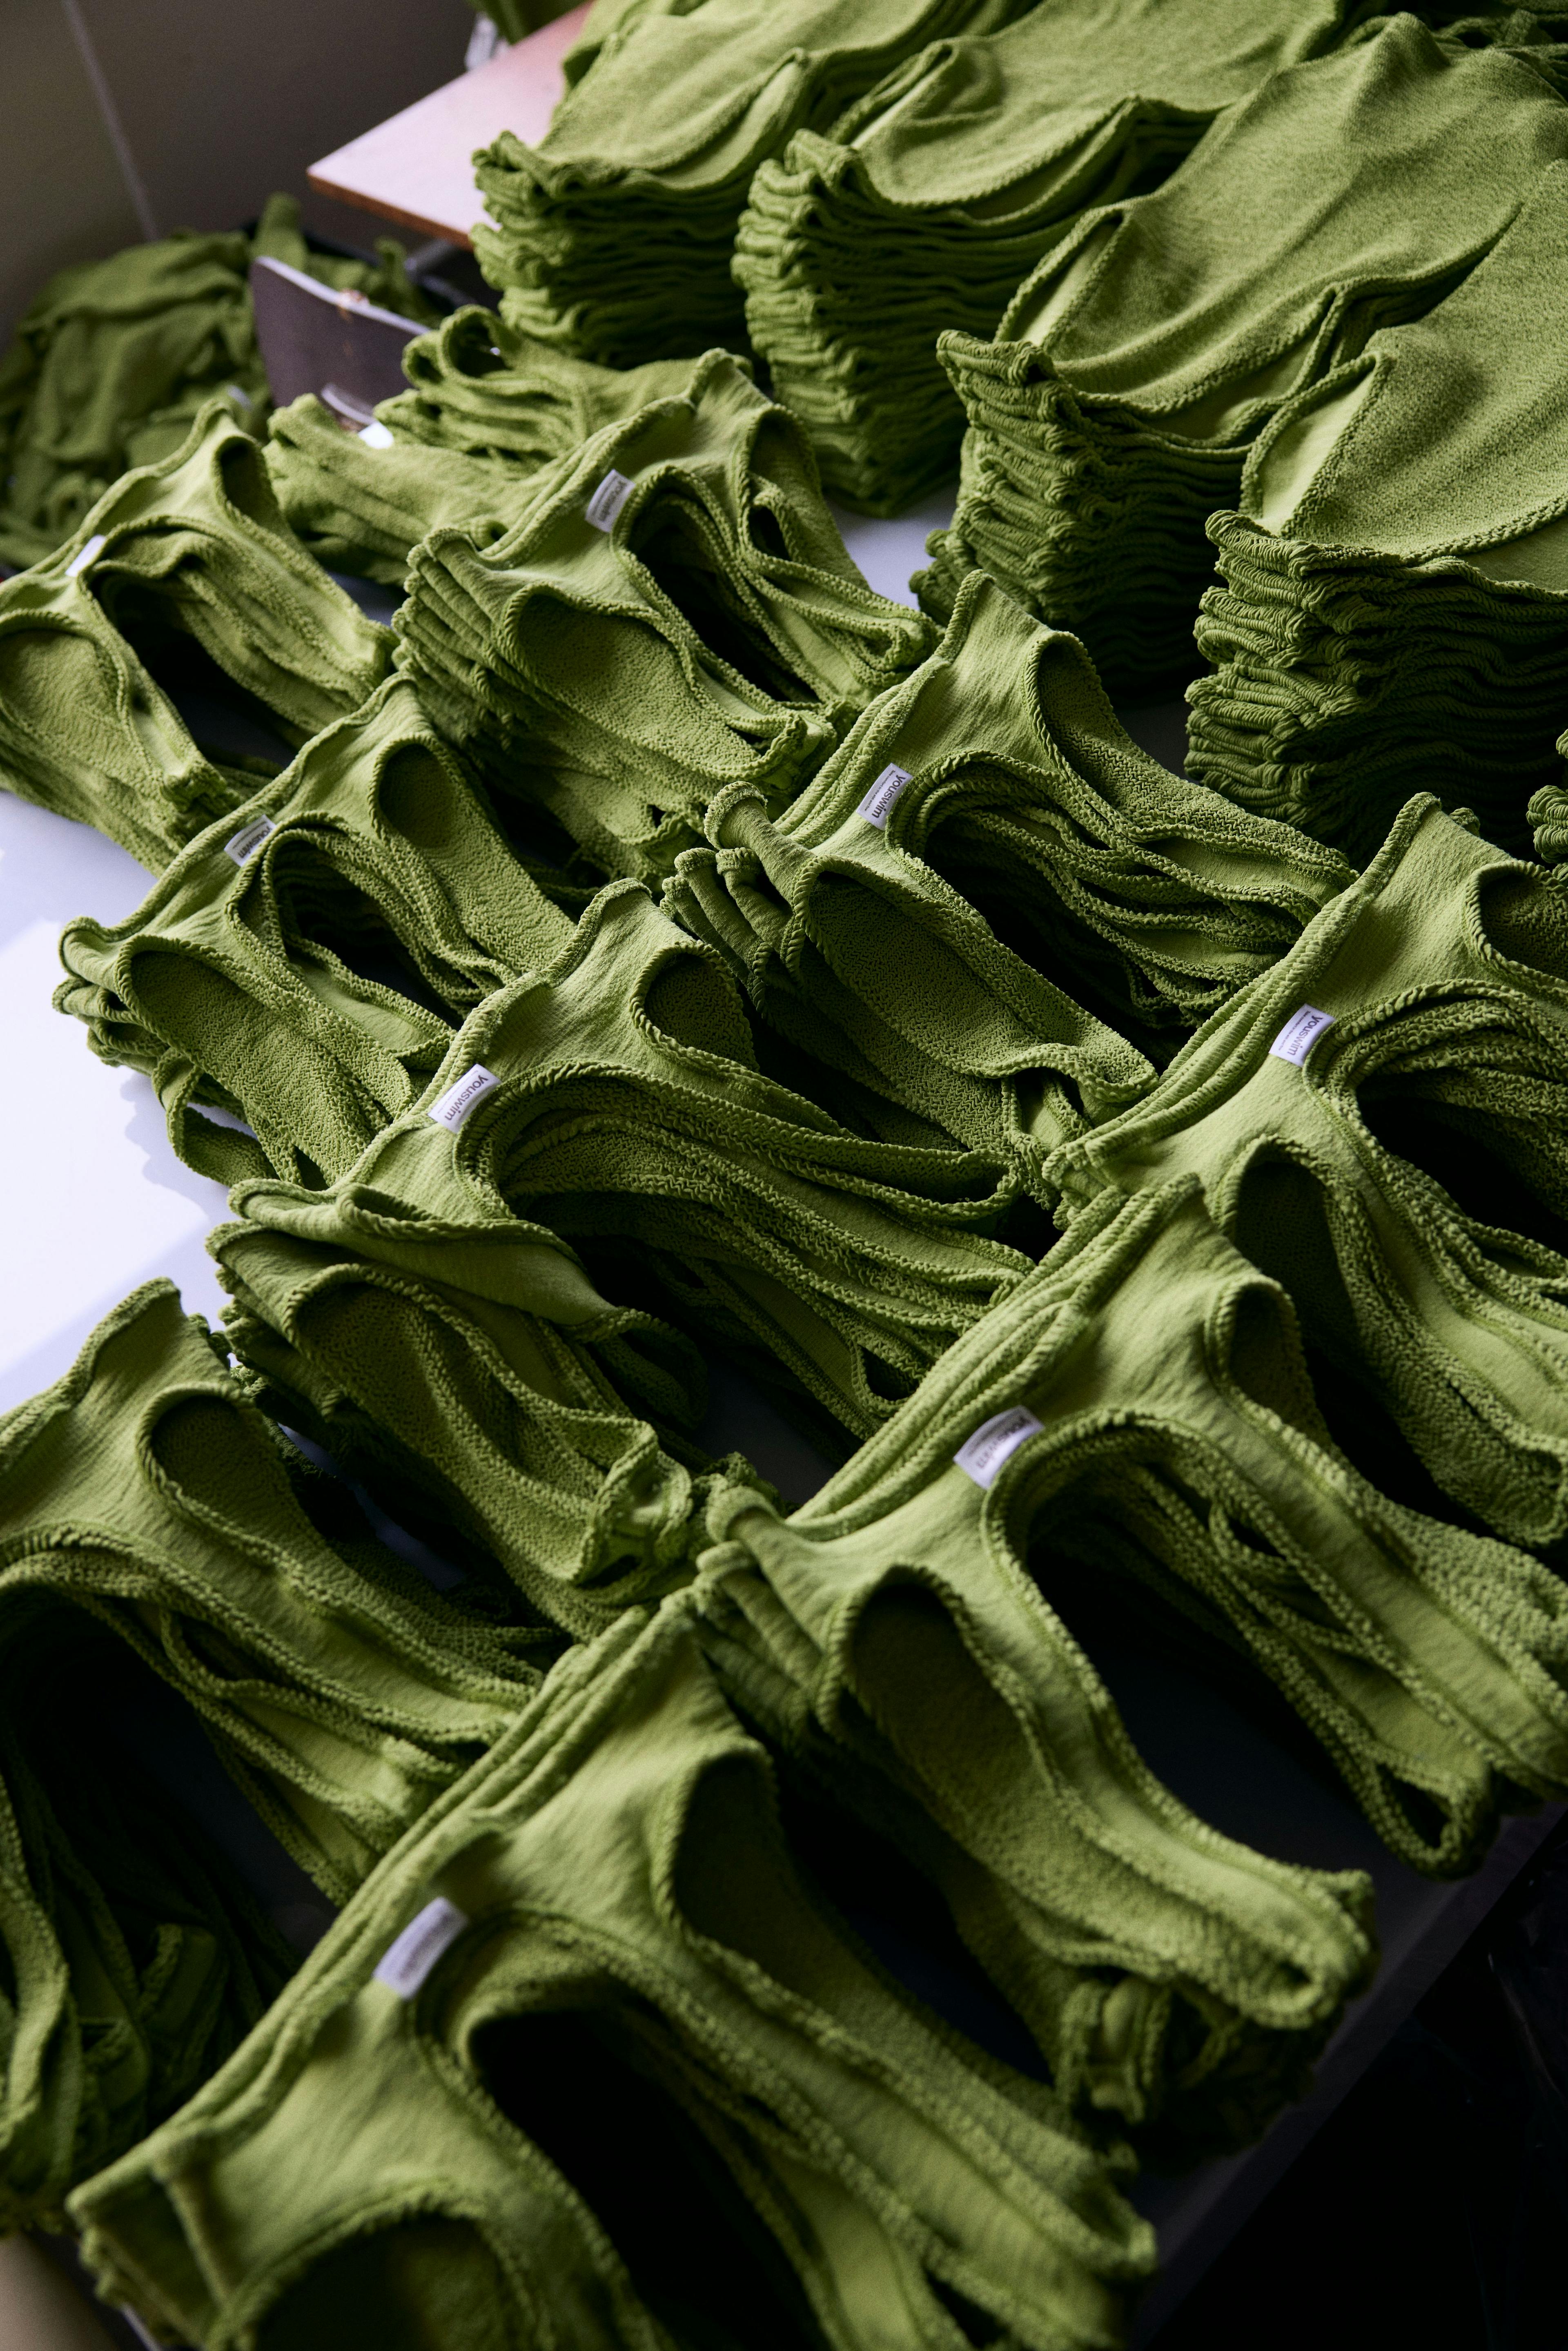 Table of multiple green swiimsuits.